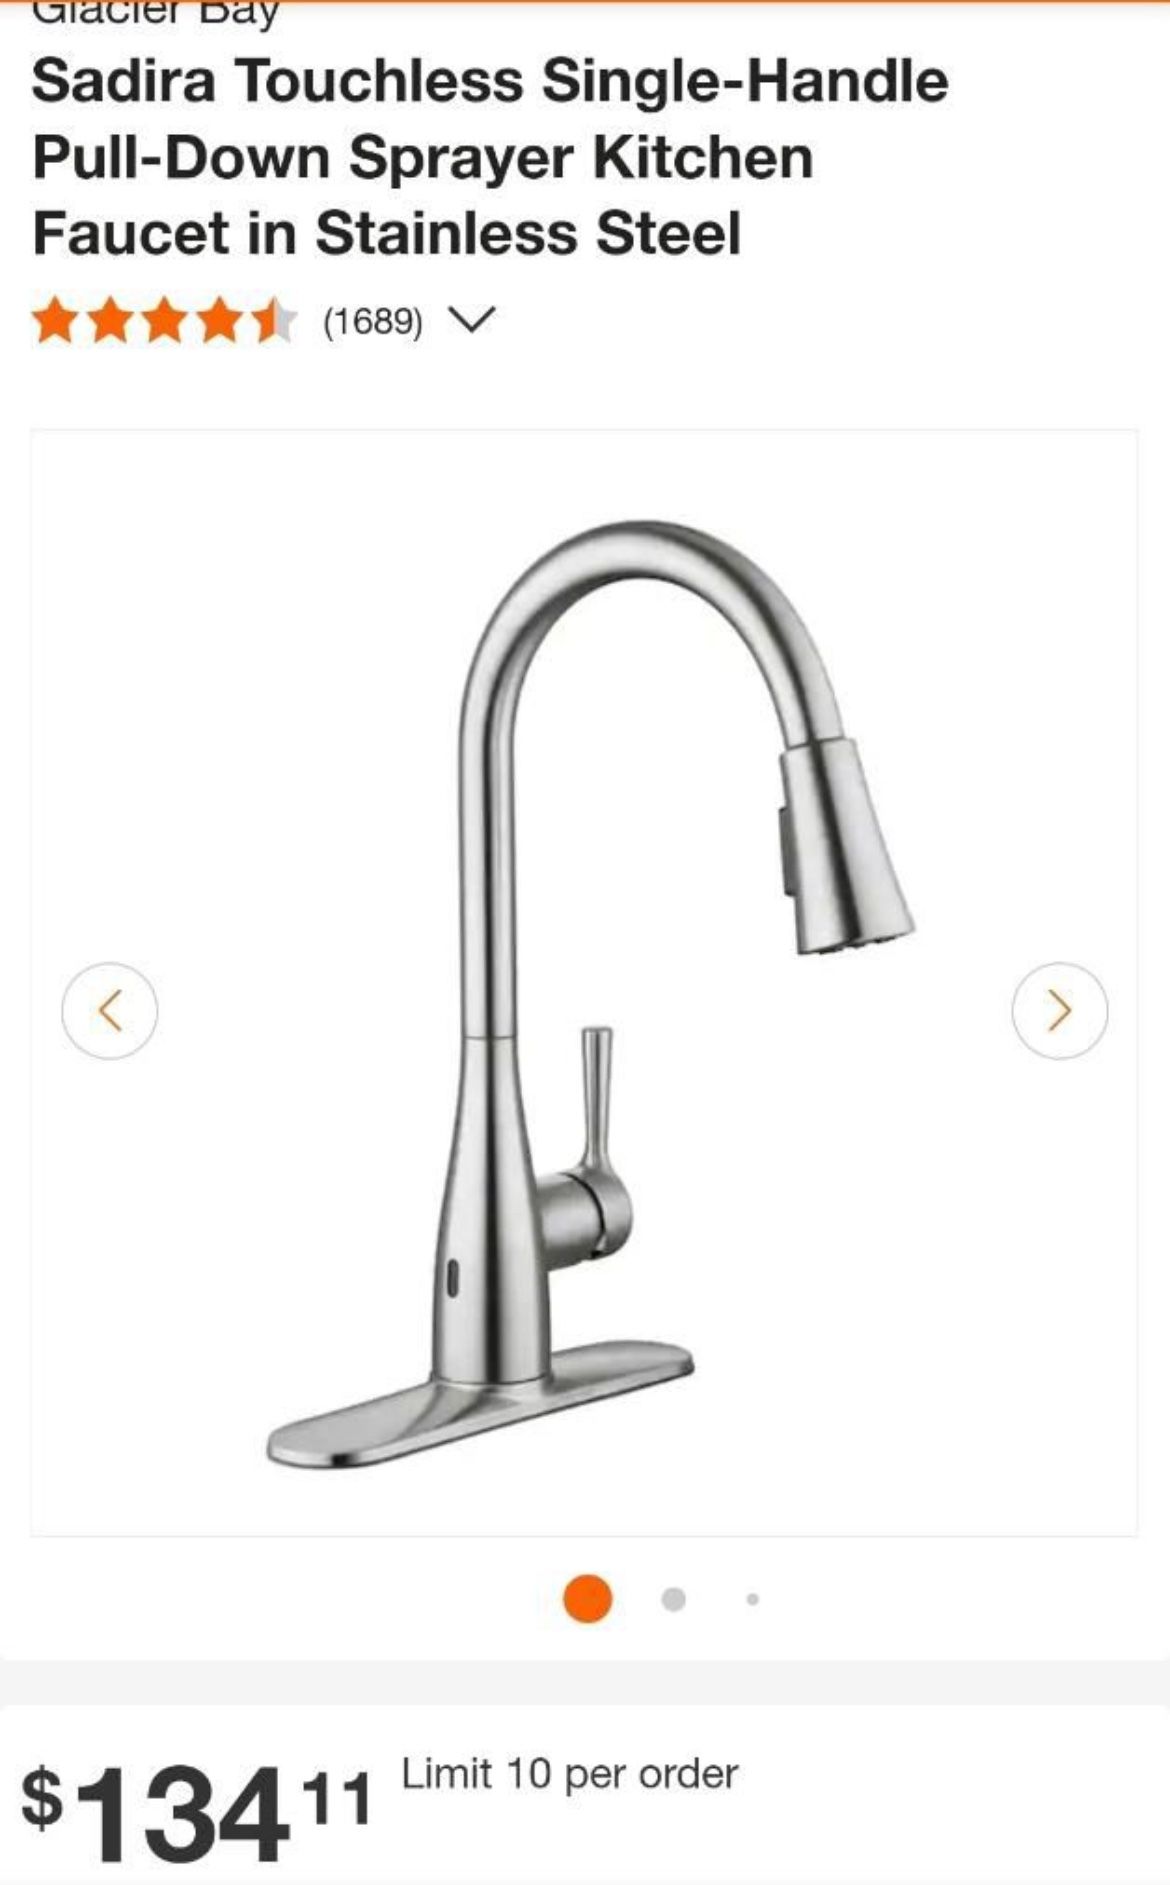 Glacier Bay  Sadira Touchless Single-Handle Pull-Down Sprayer Kitchen Faucet in Stainless Steel